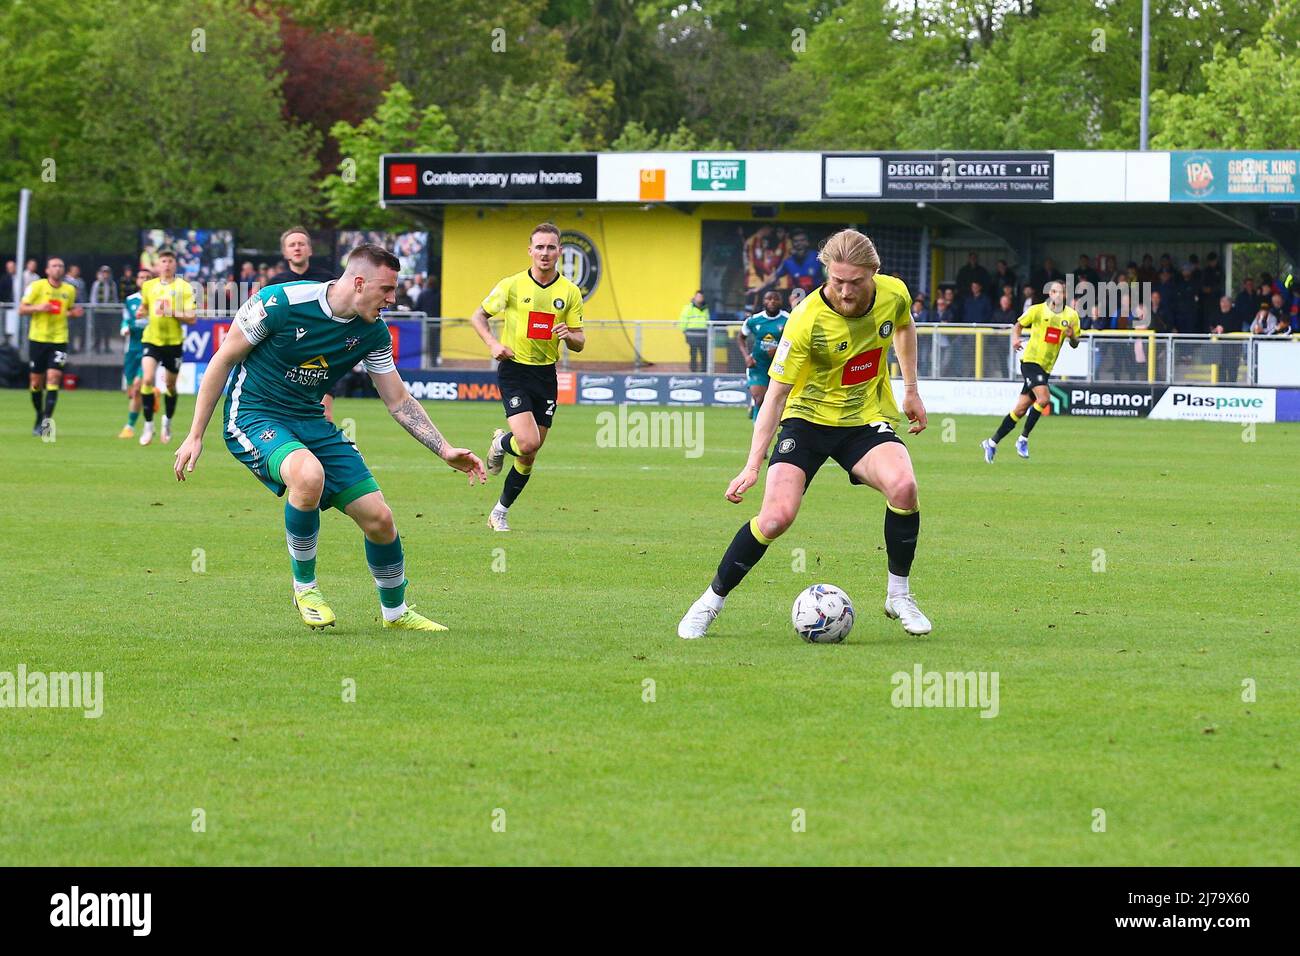 The EnviroVent Stadium, Harrogate, England - 7th May 2022 No way past for Luke Armstrong (29) of Harrogate - during the game Harrogate v Sutton, EFL League 2, 2021/22, at The EnviroVent Stadium, Harrogate, England - 7th May 2022  Credit: Arthur Haigh/WhiteRosePhotos/Alamy Live News Stock Photo